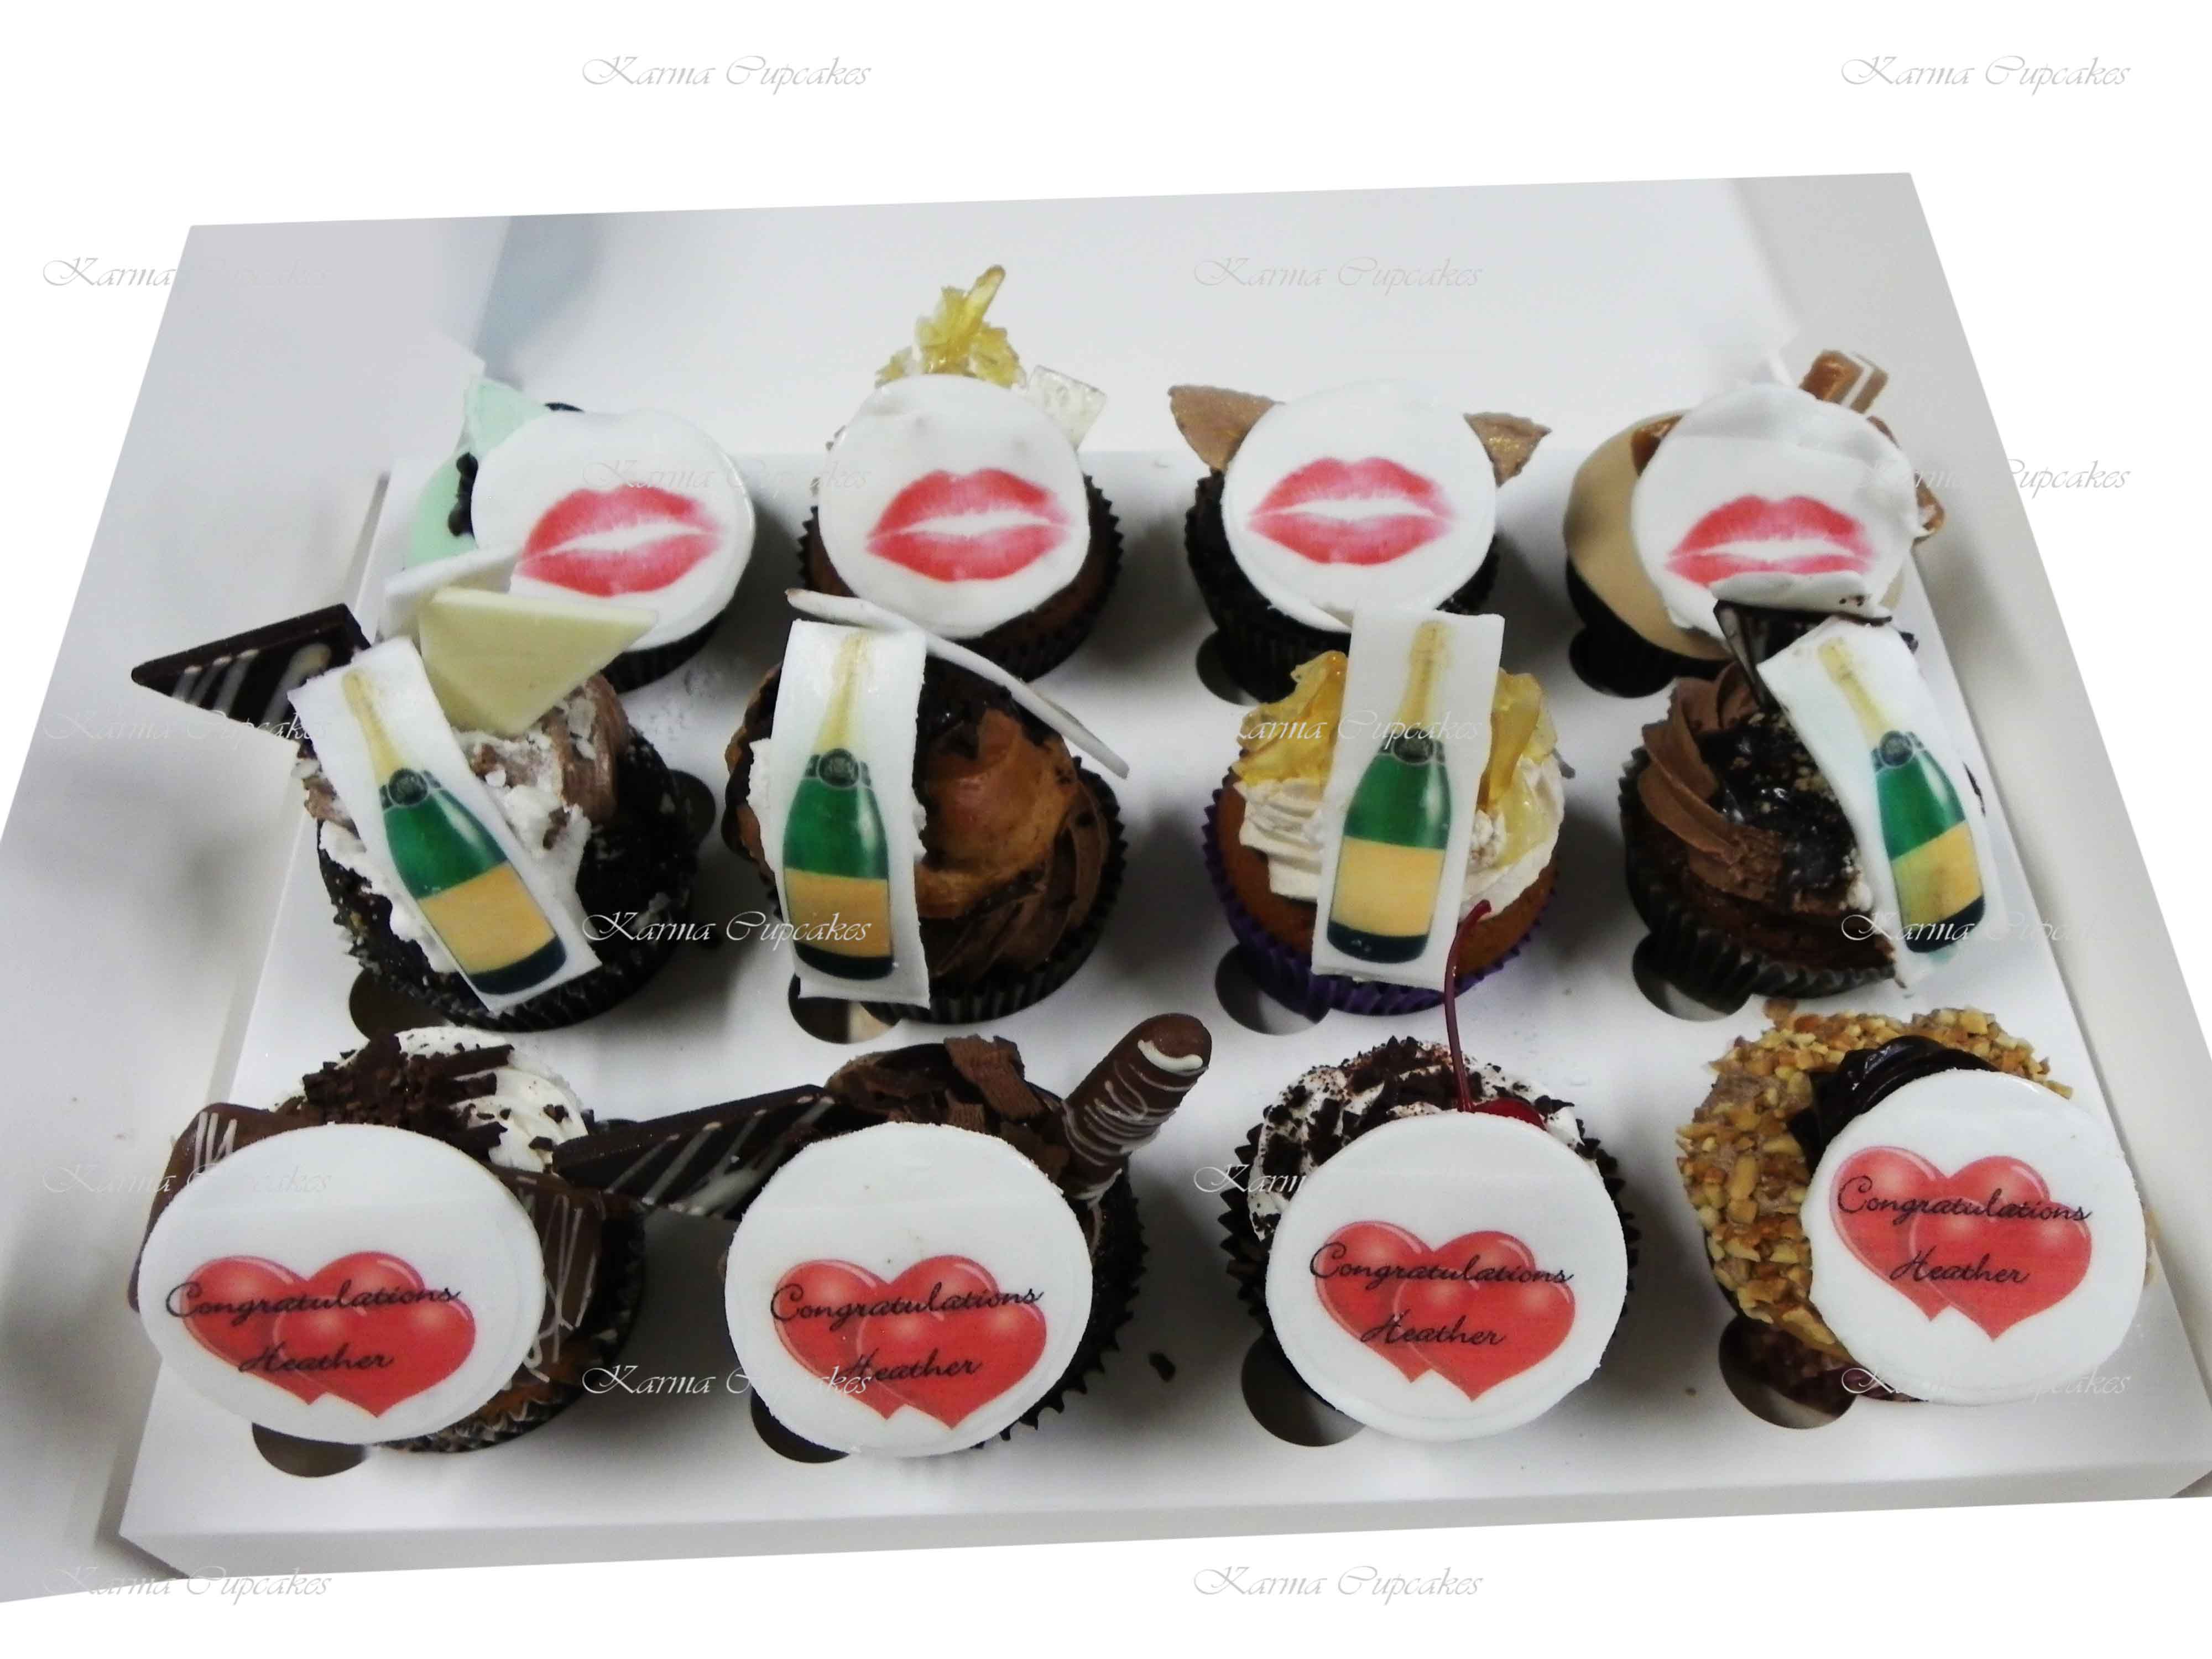 Hen's Night Gourmet Cupcakes with Edible Images